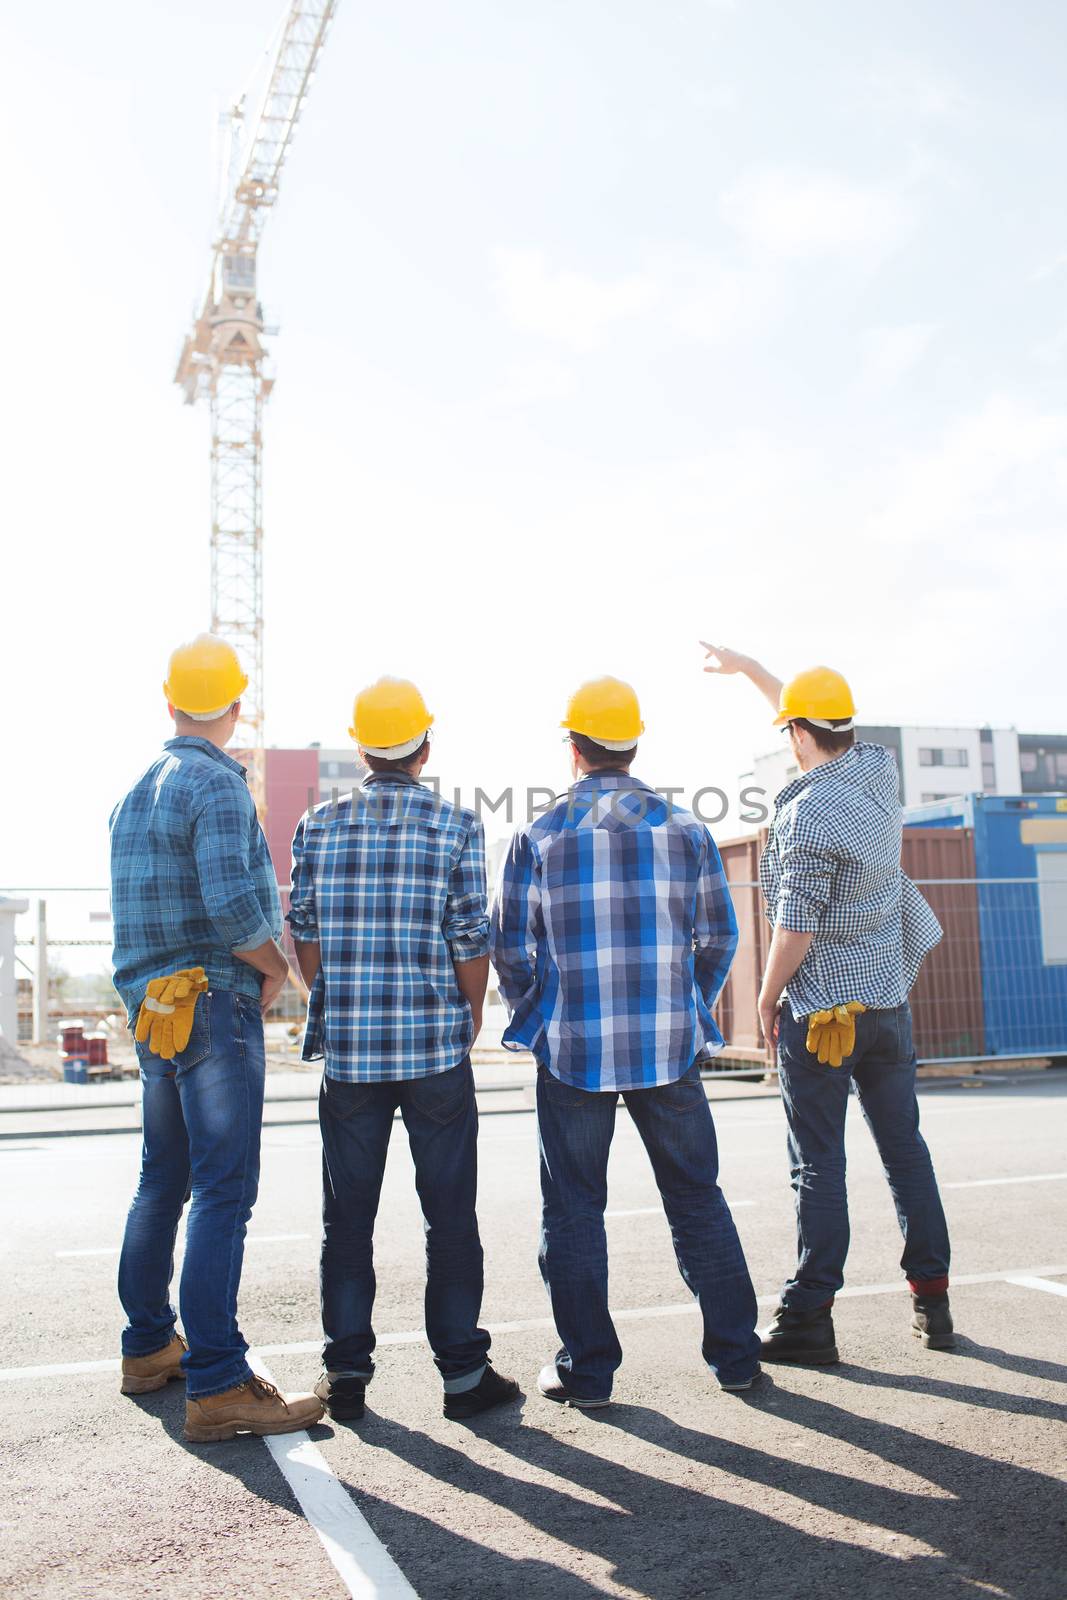 business, building, teamwork and people concept - group of builders in hardhats outdoors from back